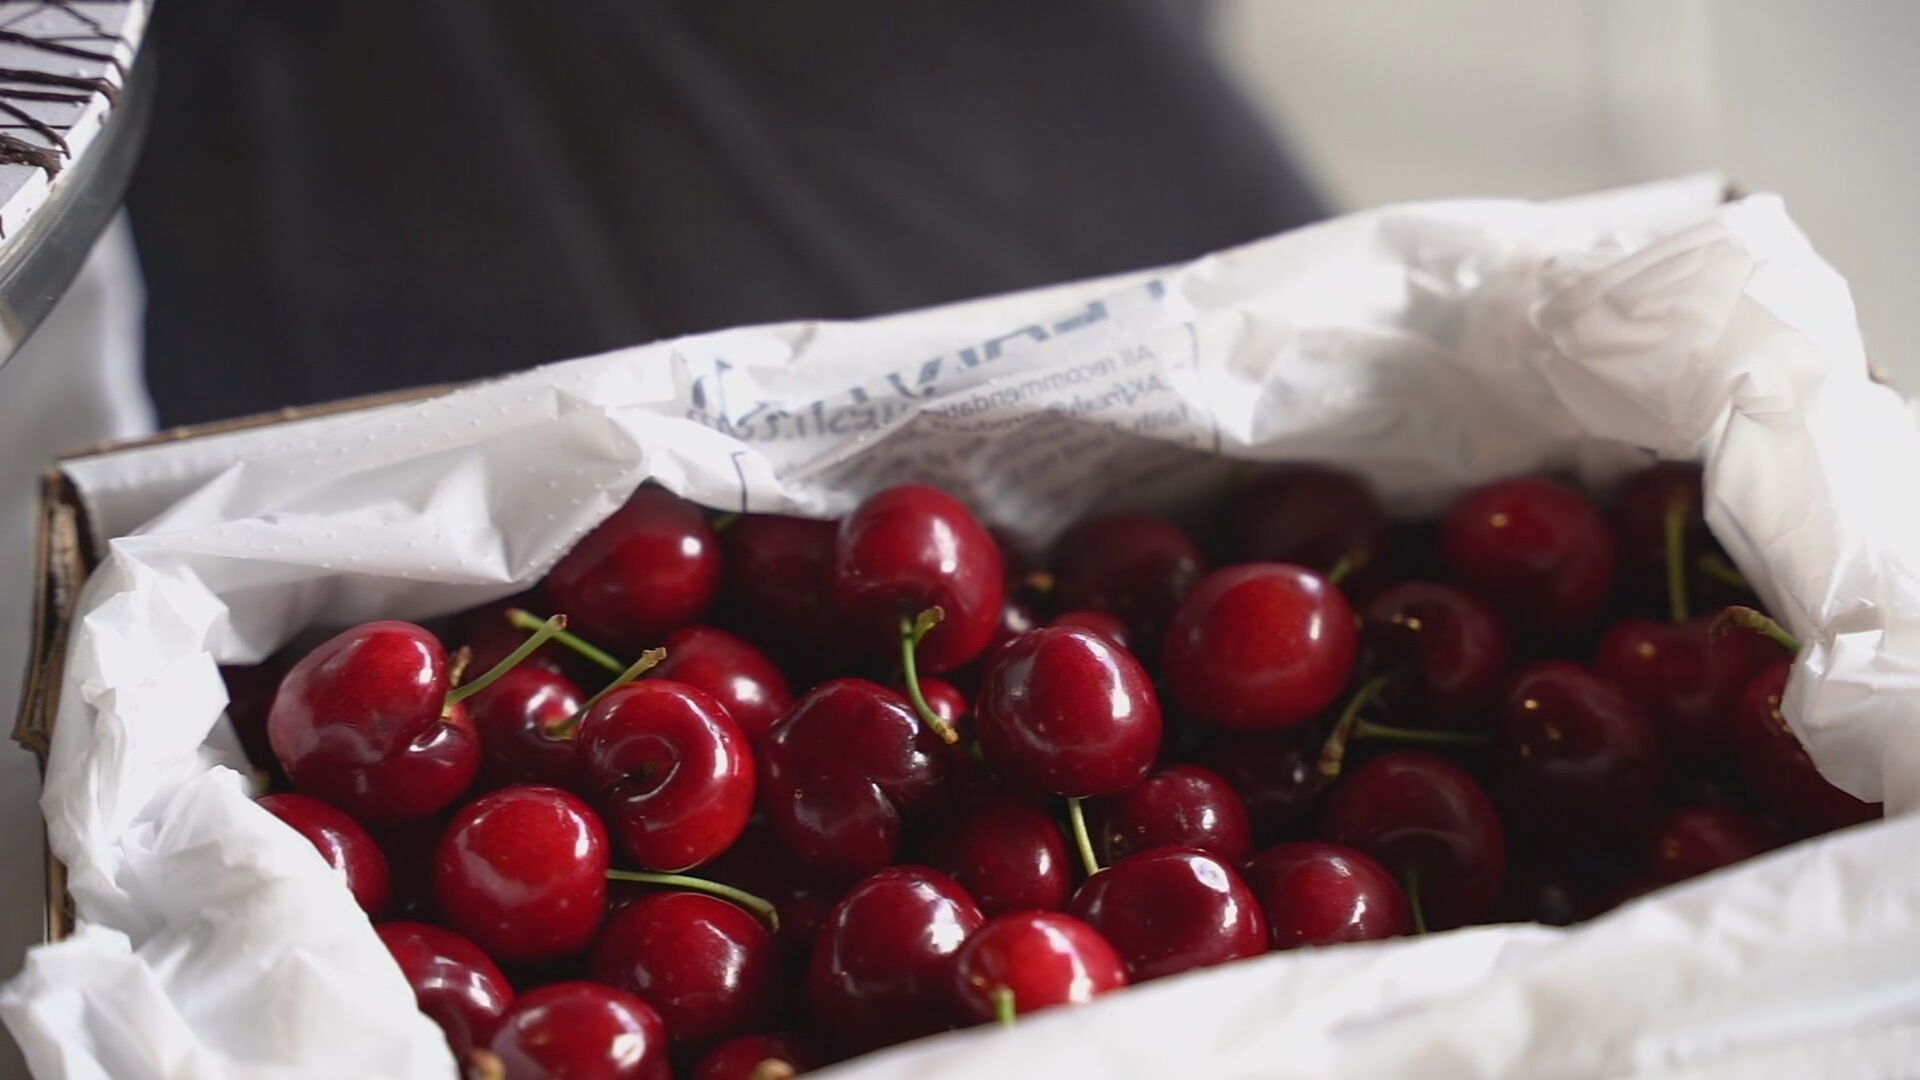 Five kilos of cherries sell for $50,000